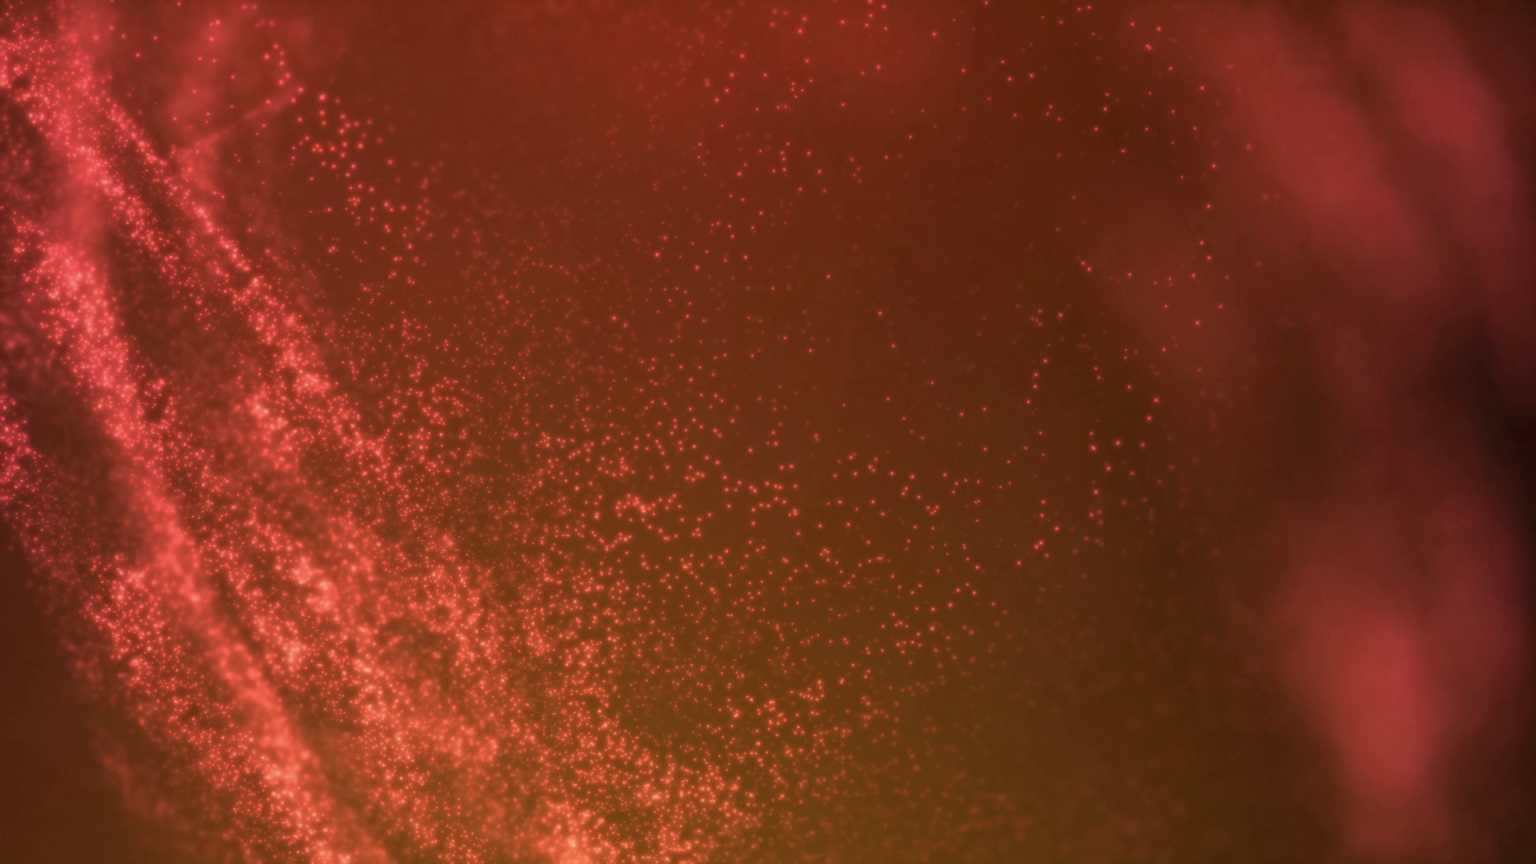 4K Glowing Orange Particles Motion Background || VFX Free To Use Screensaver || Free Download